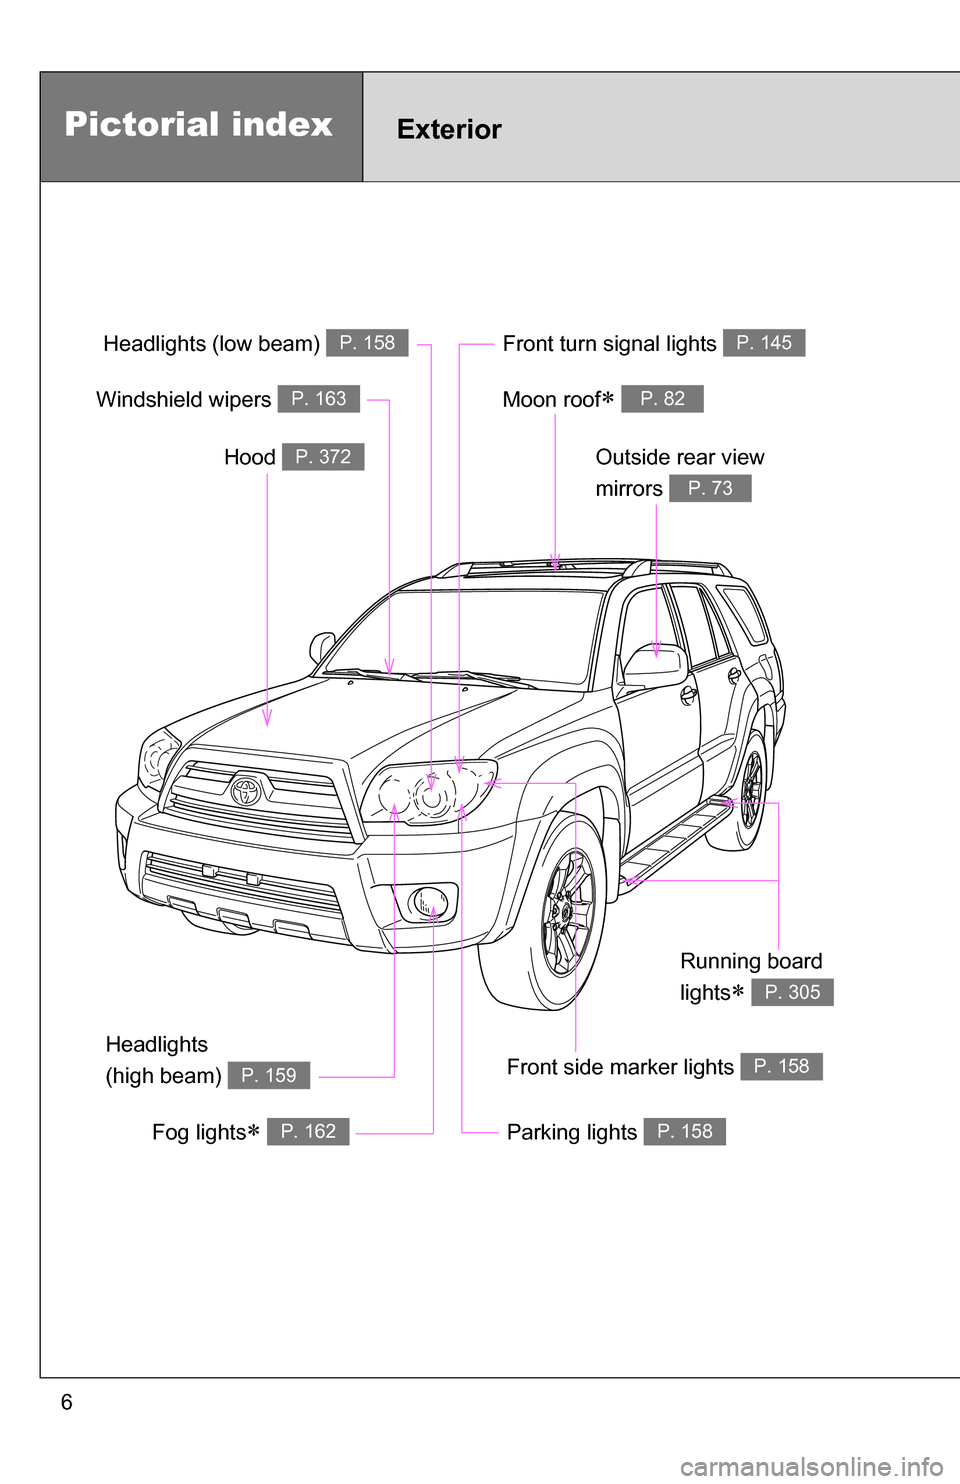 TOYOTA 4RUNNER 2009 N280 / 5.G Owners Manual 6
Headlights 
(high beam) 
P. 159
Pictorial indexExterior
Hood P. 372
Windshield wipers P. 163
Front turn signal lights P. 145
Front side marker lights P. 158
Running board 
lights
 P. 305
Headligh